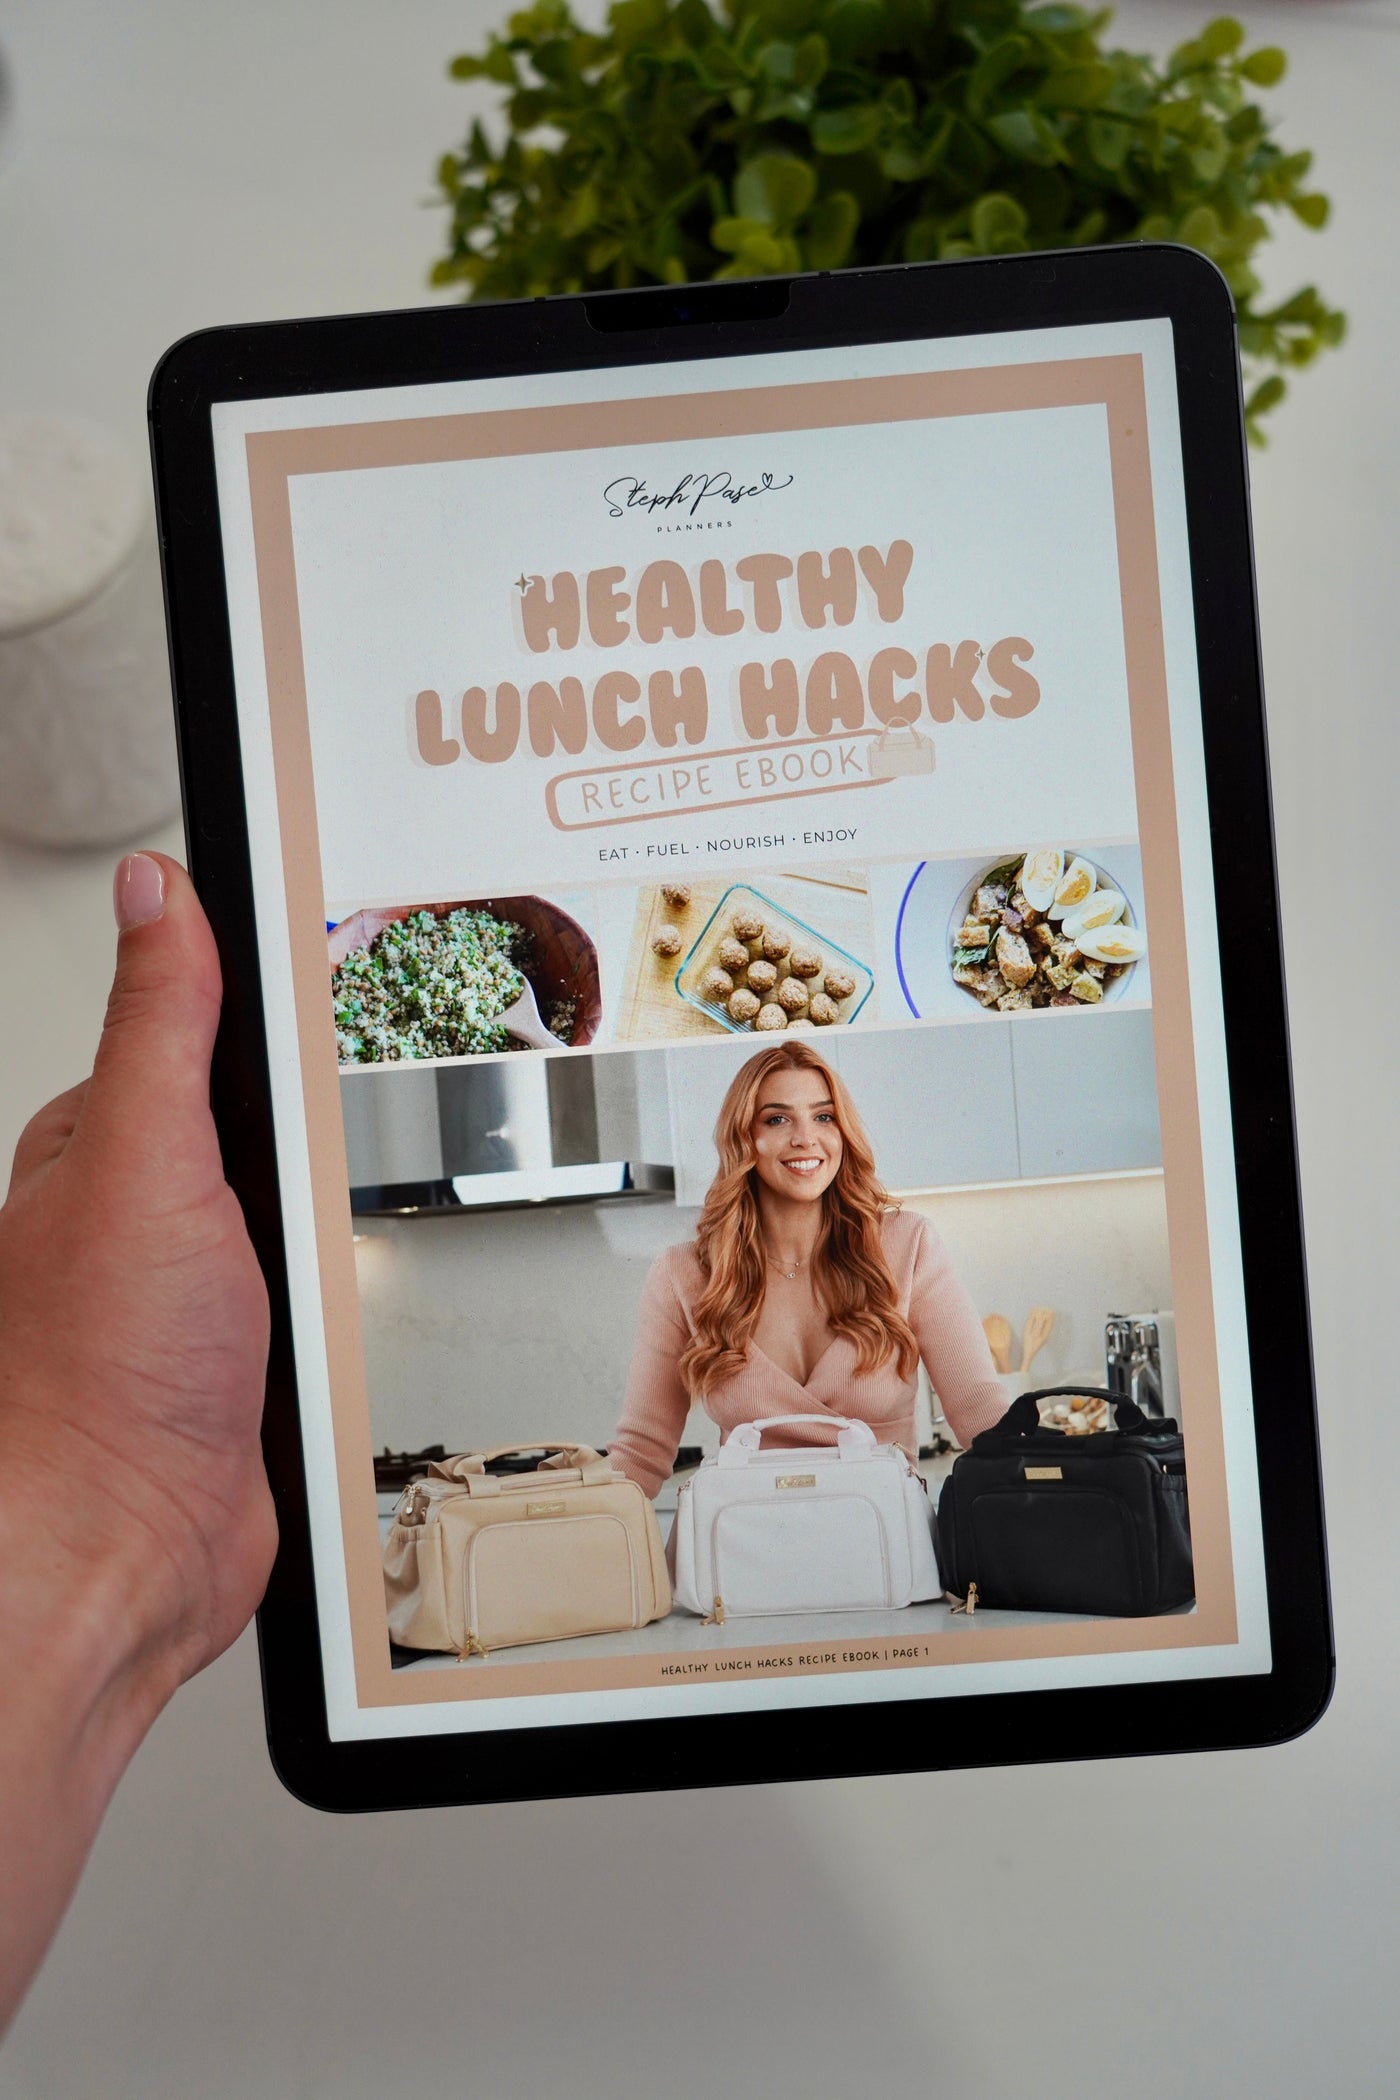 OFFER Free Healthy Lunch Hacks Recipe eBook Download YOU NEED TO ADD TO CART TO BE ELIGIBLE